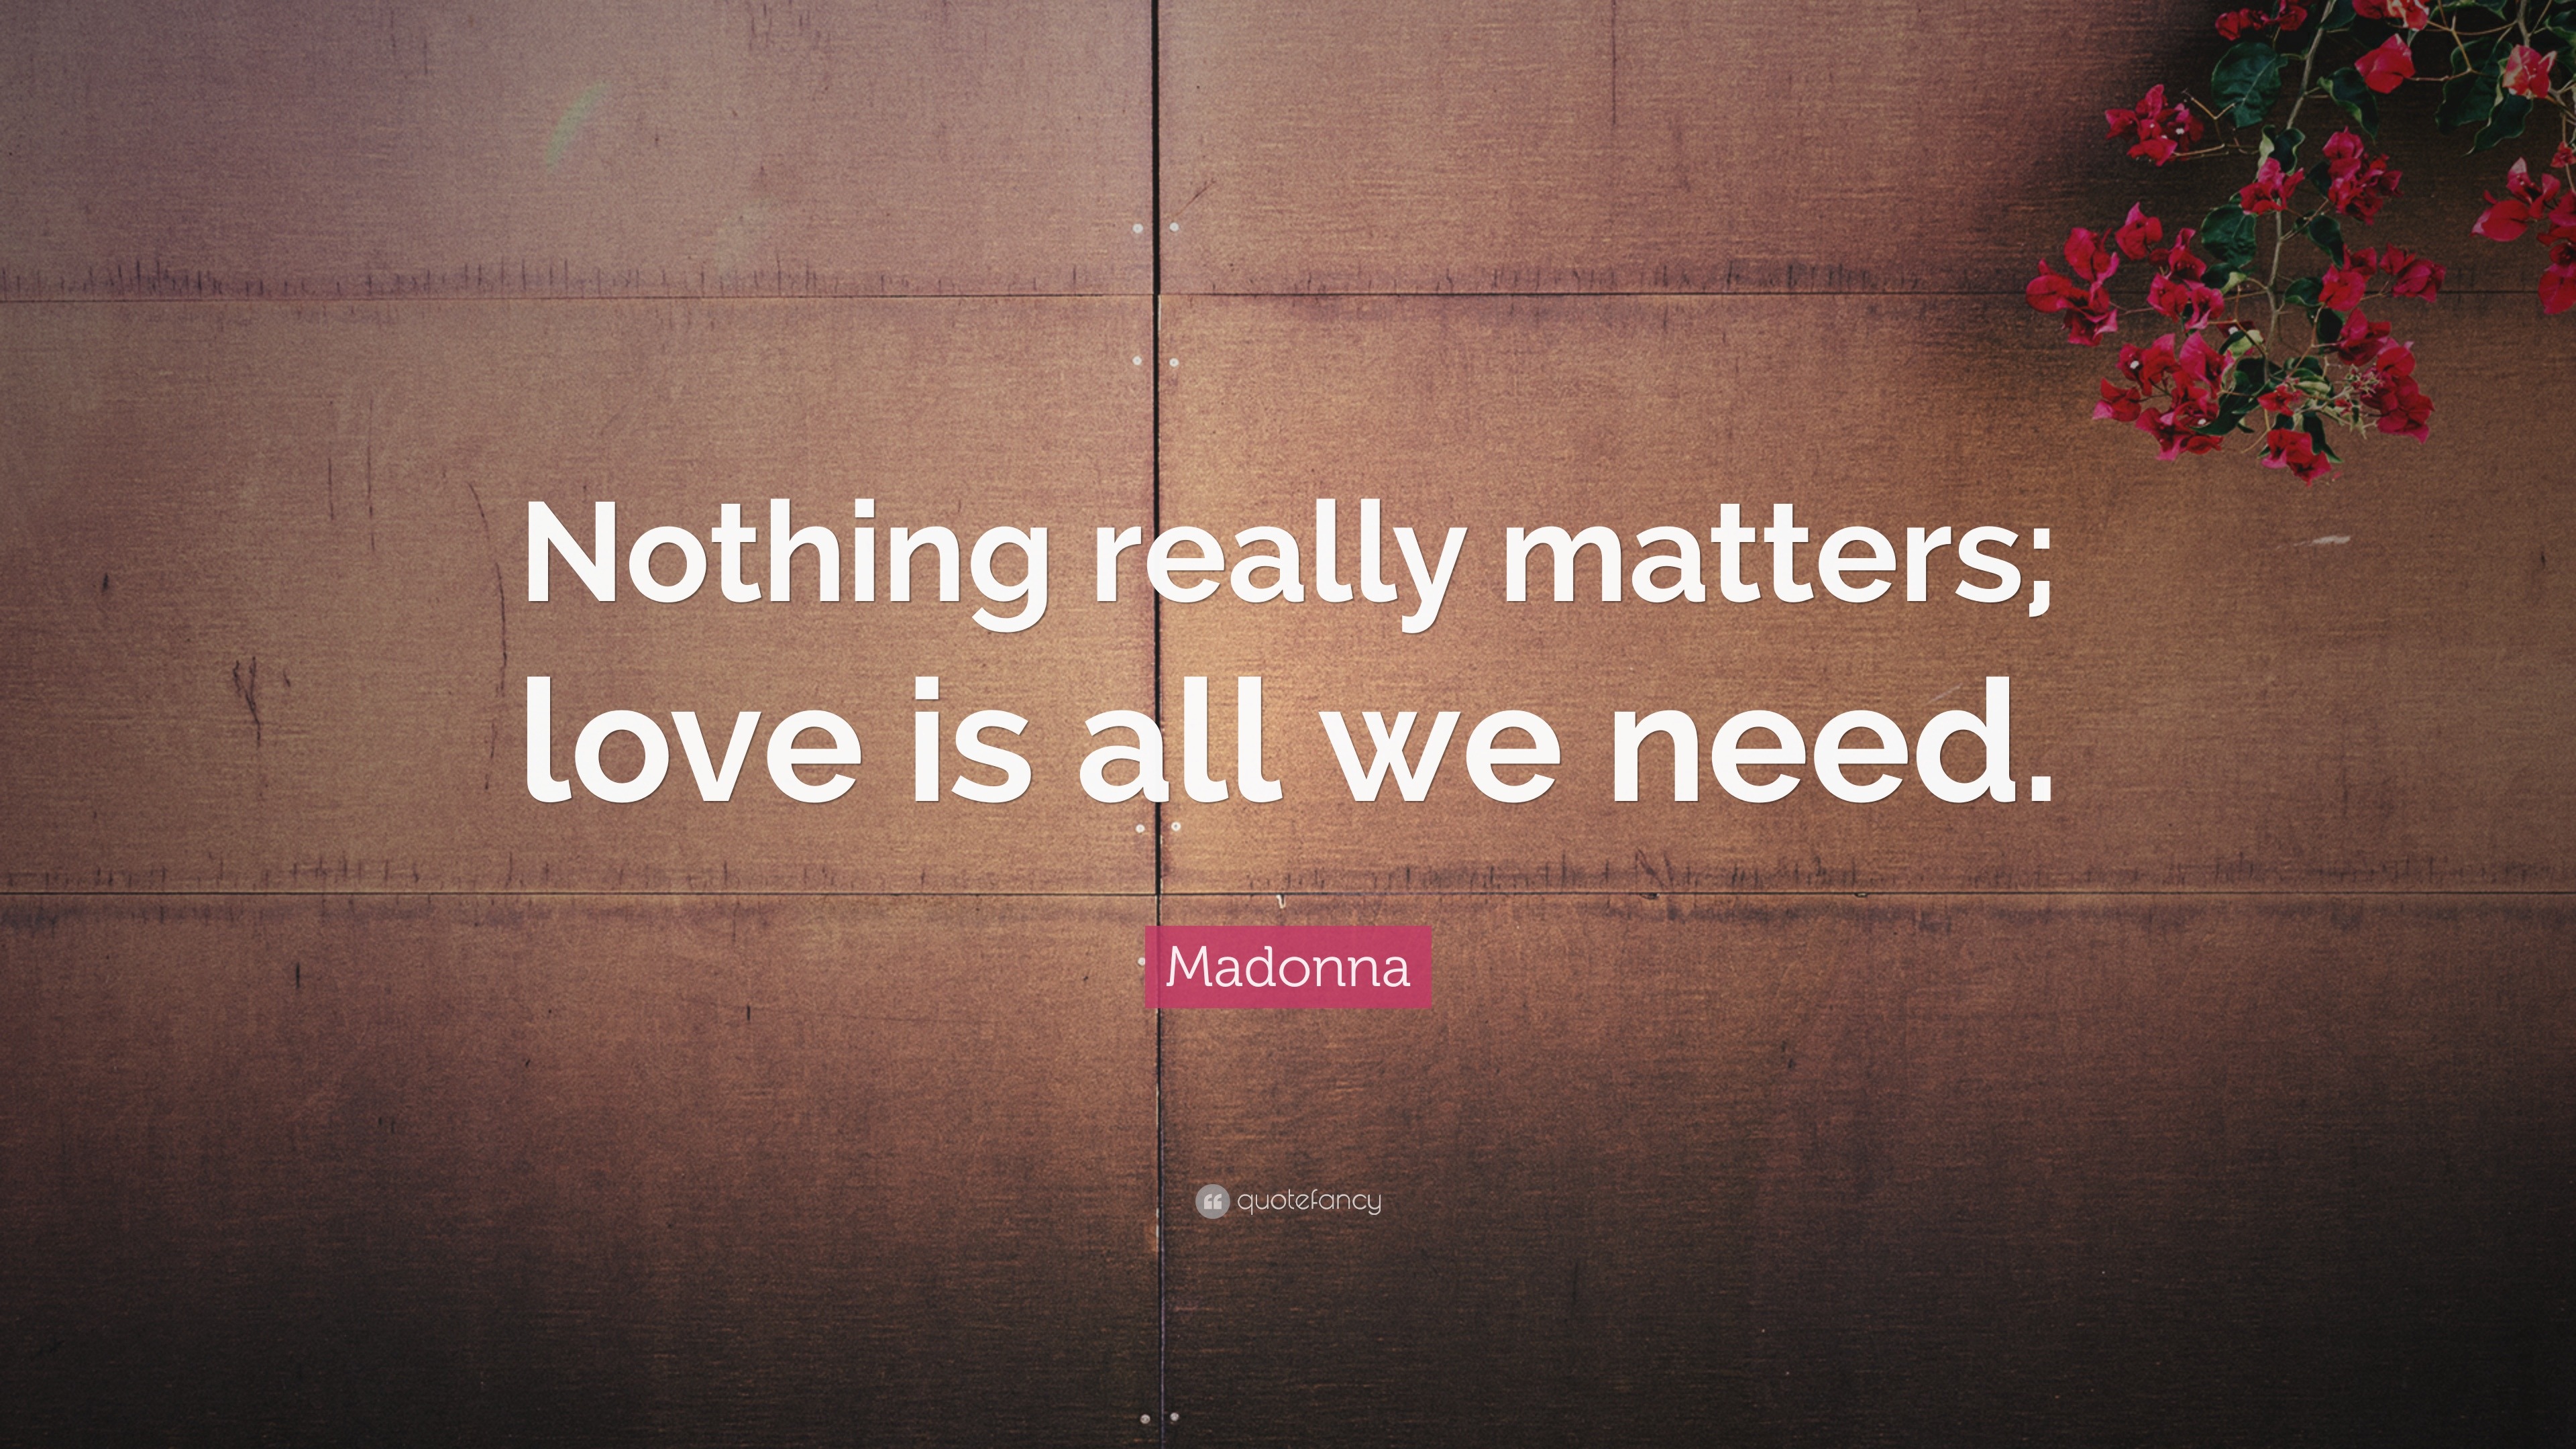 Madonna Quote “Nothing really matters love is all we need ”